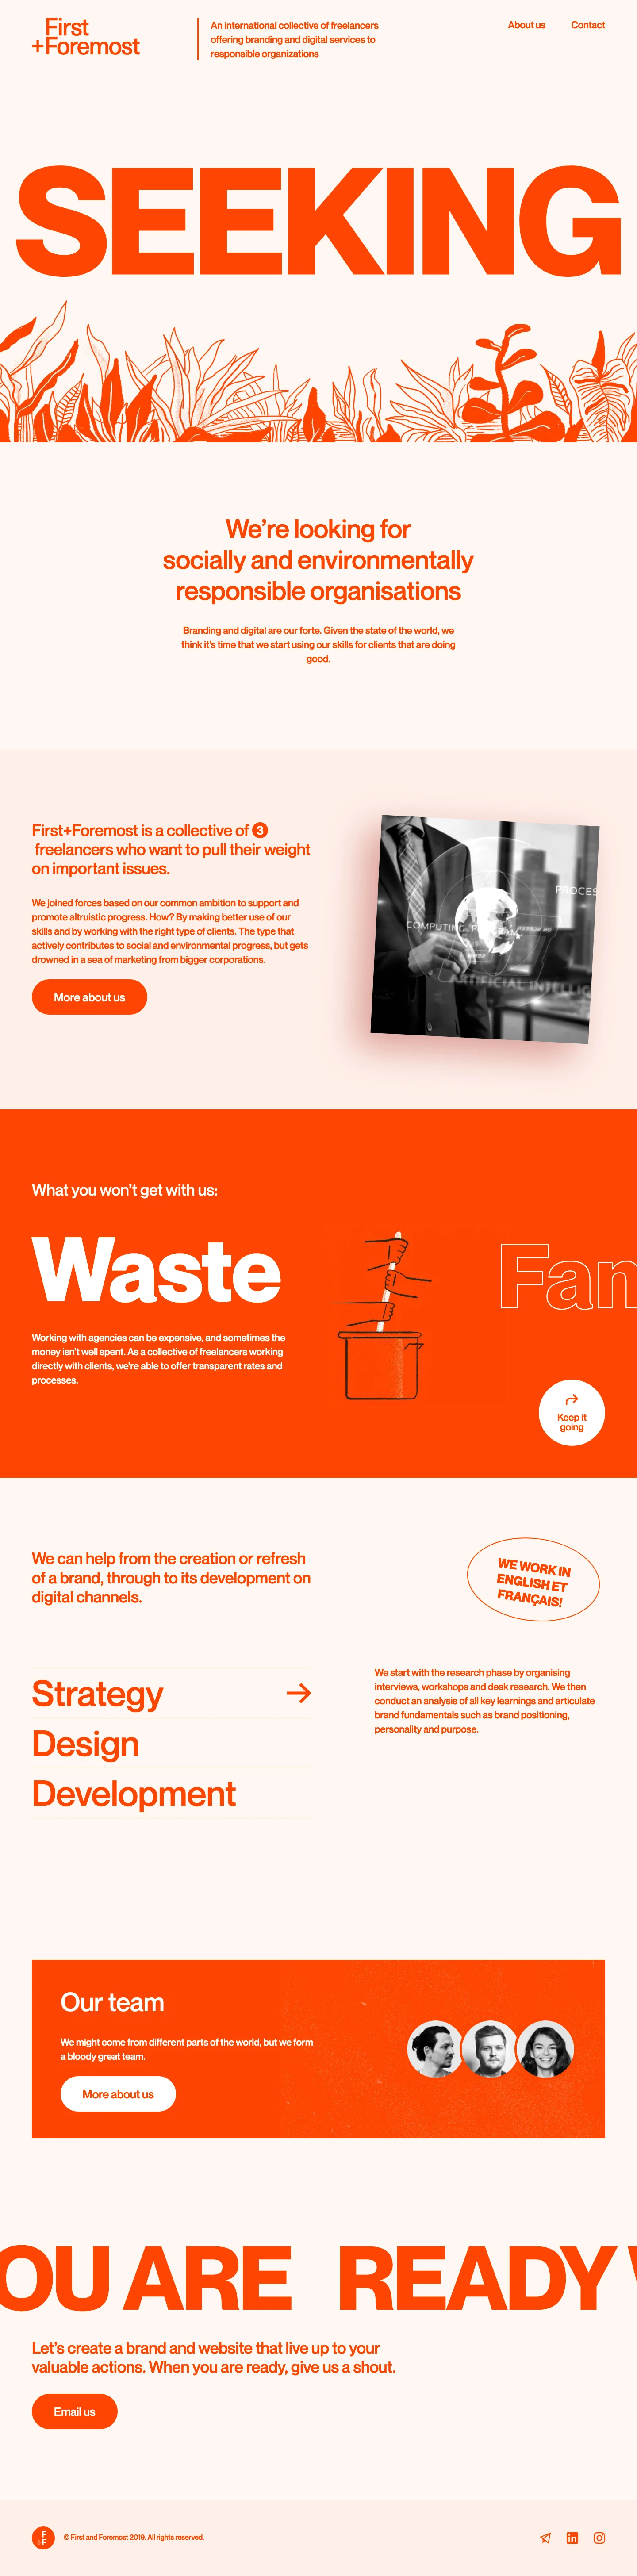 First and Foremost Landing Page Example: An international collective of freelancers offering branding and digital services to responsible organizations.